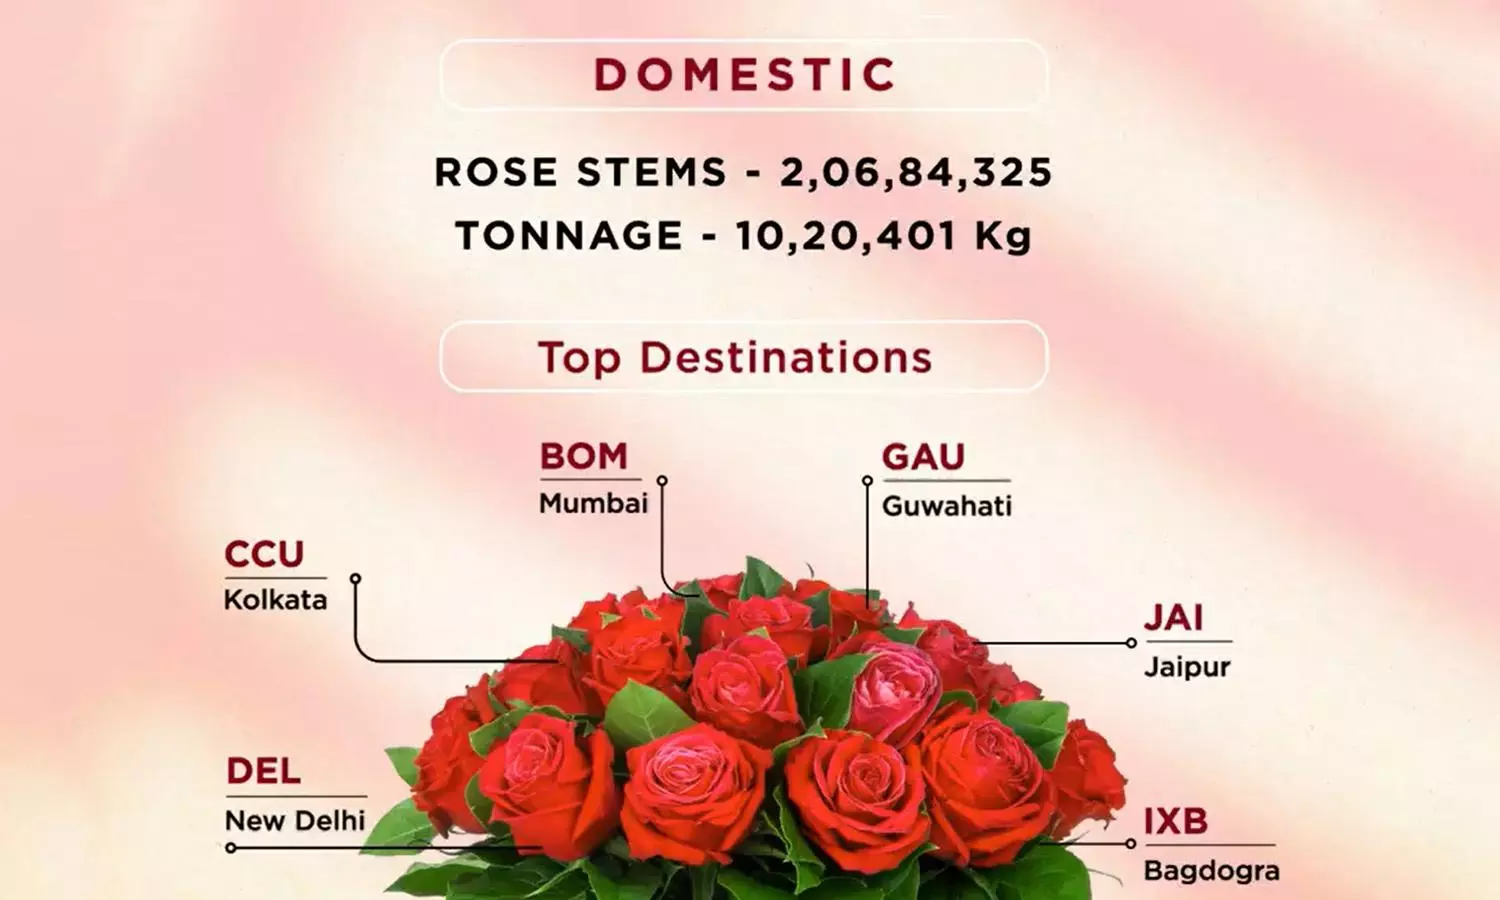 BLR Airport handles 148% more domestic rose stems this Valentine